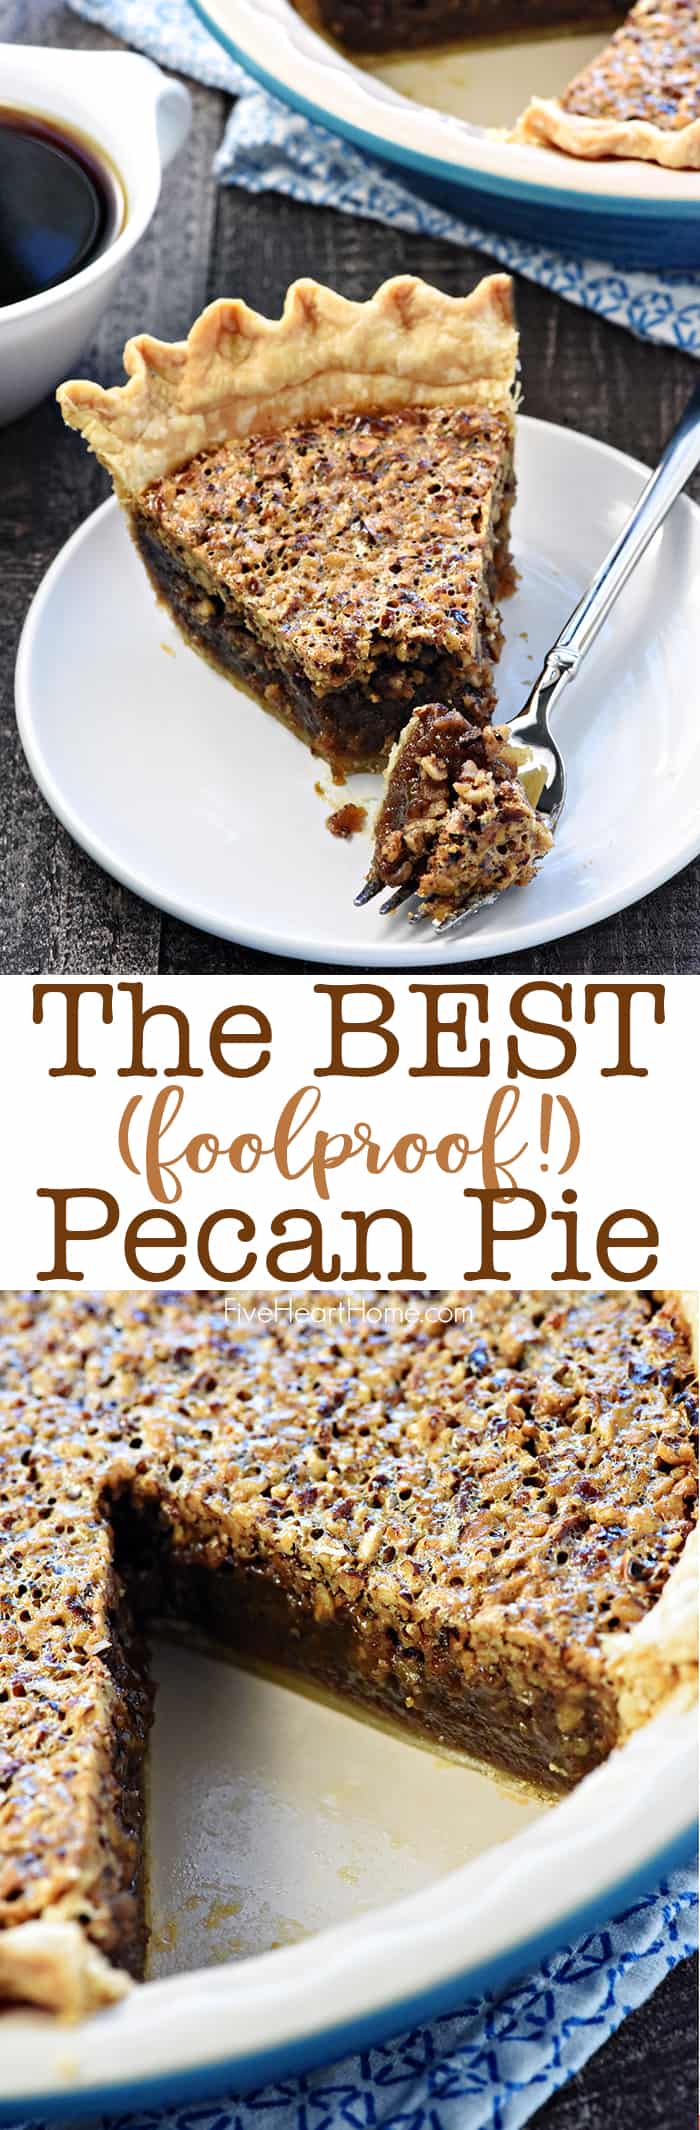 Best Pecan Pie recipe, two-photo collage with text.